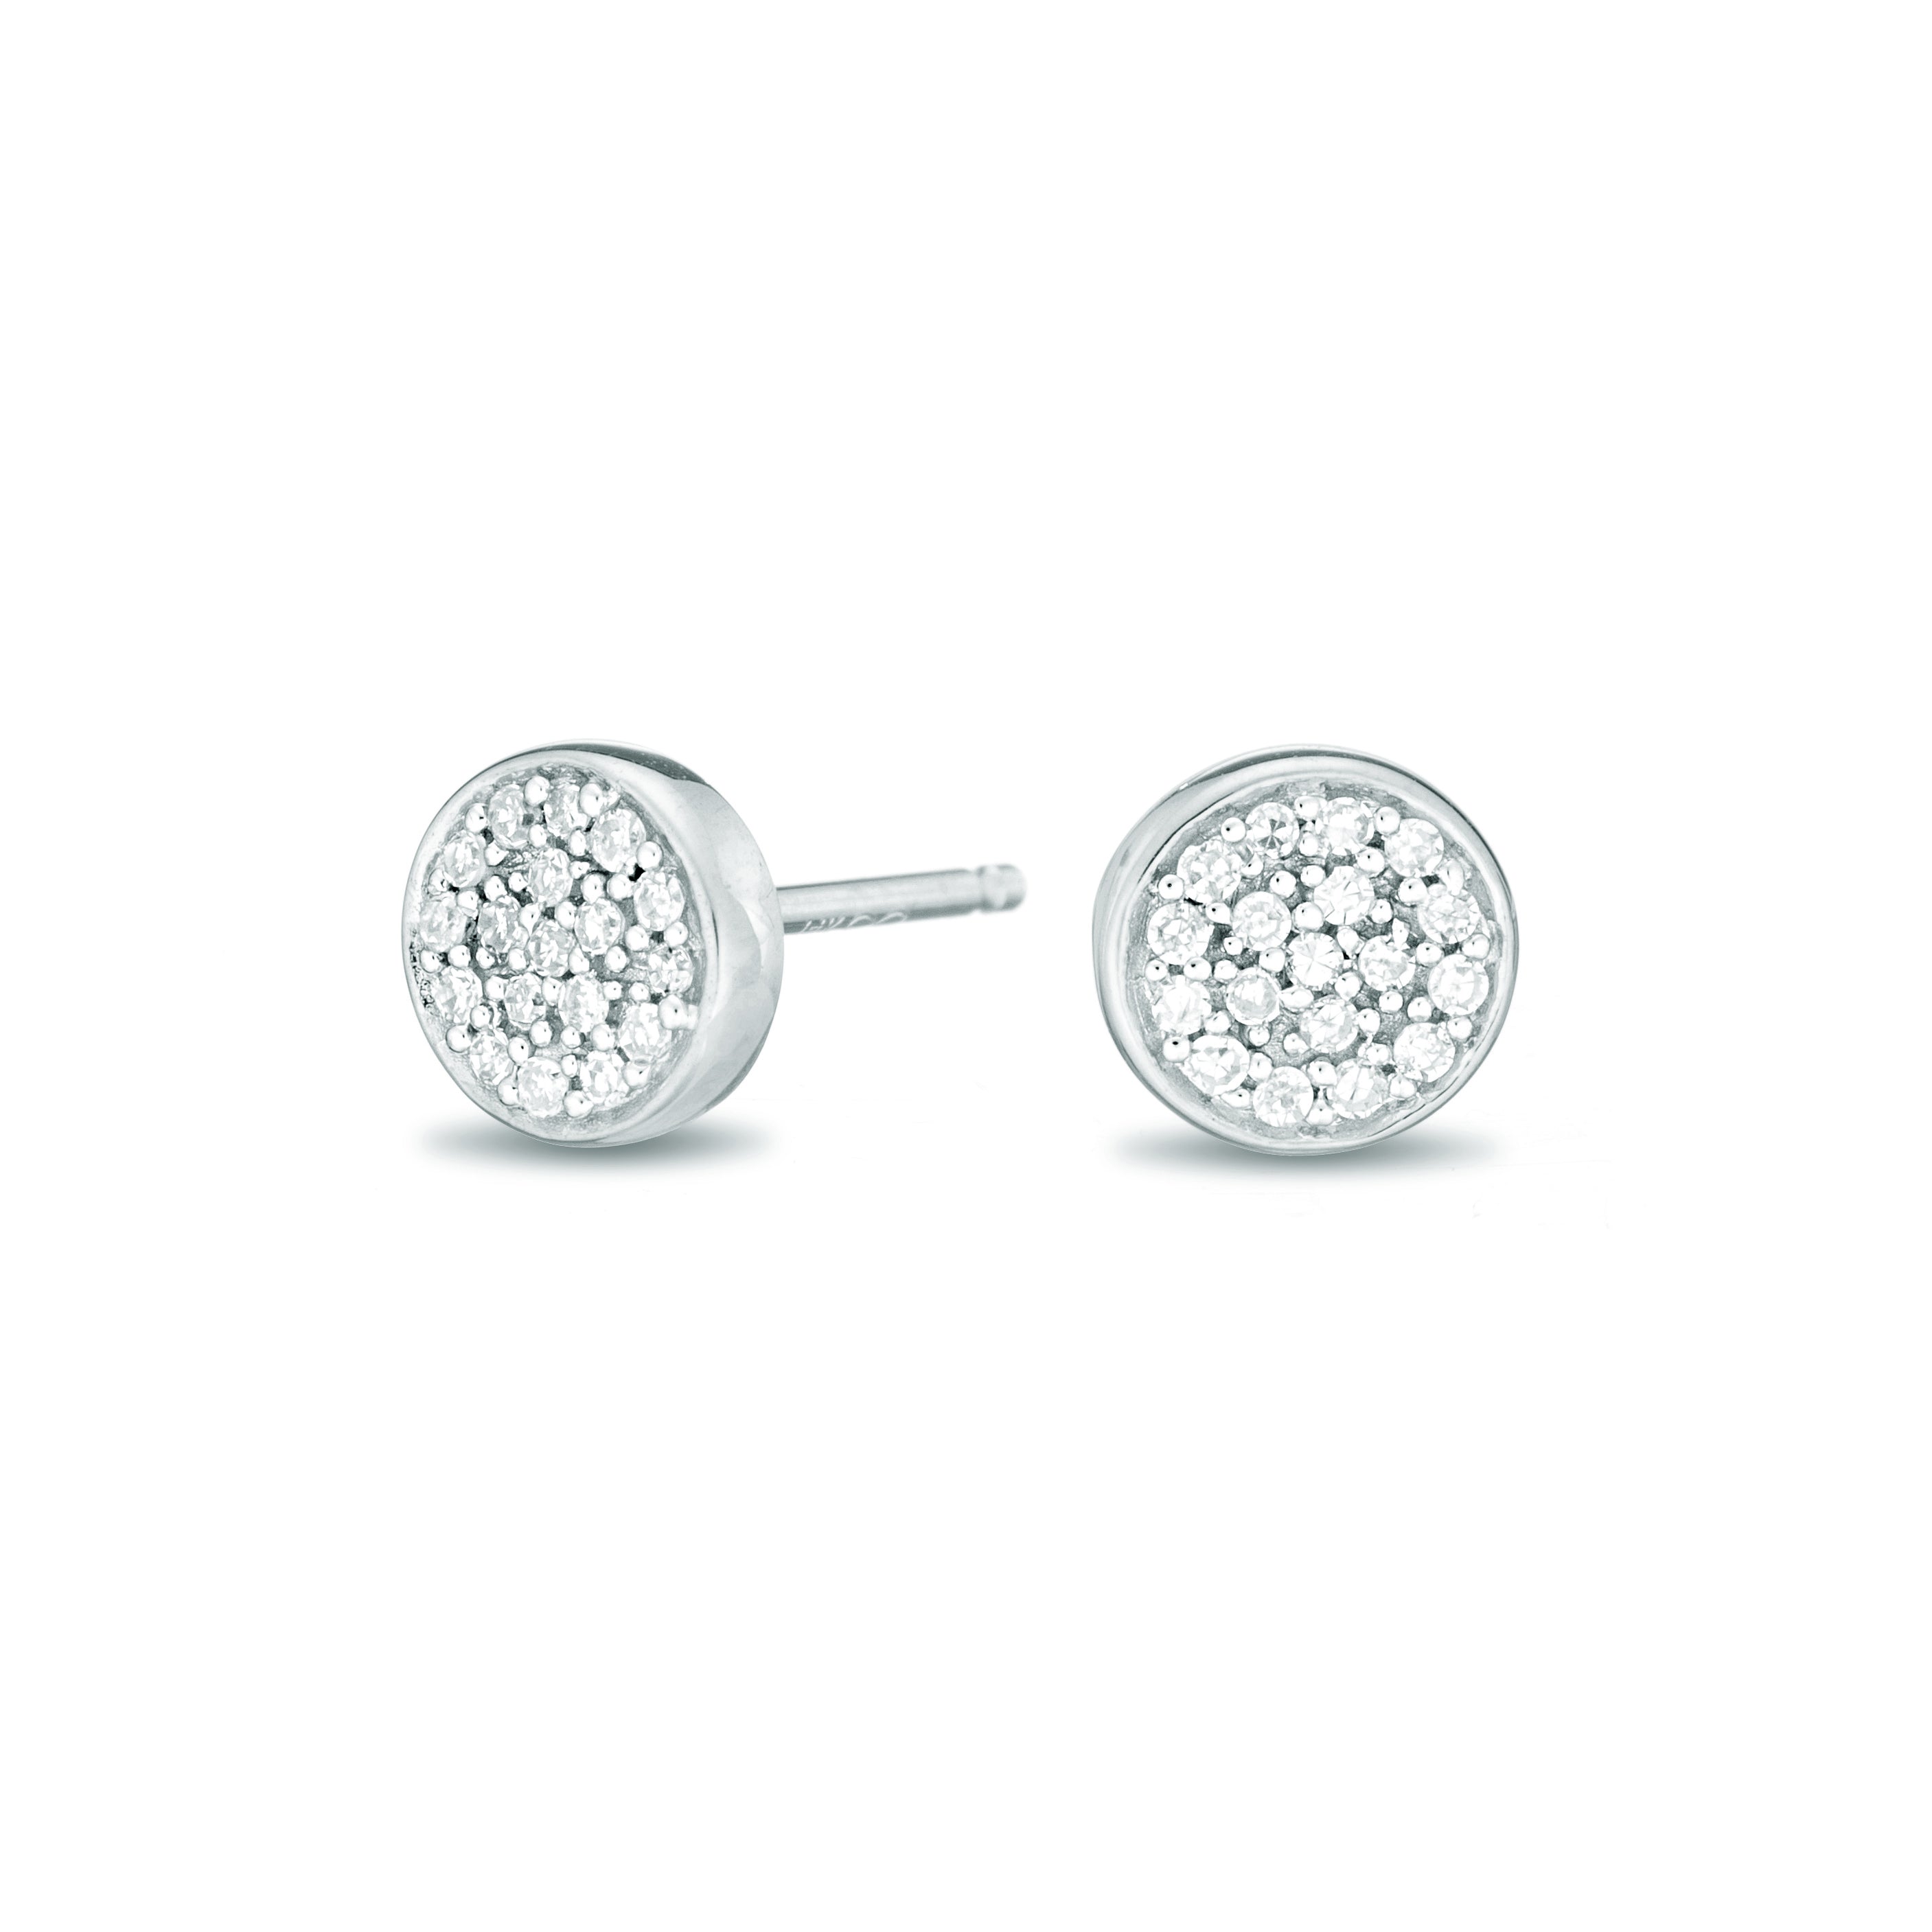 Solid Pavé Disc Posts in Sterling Silver